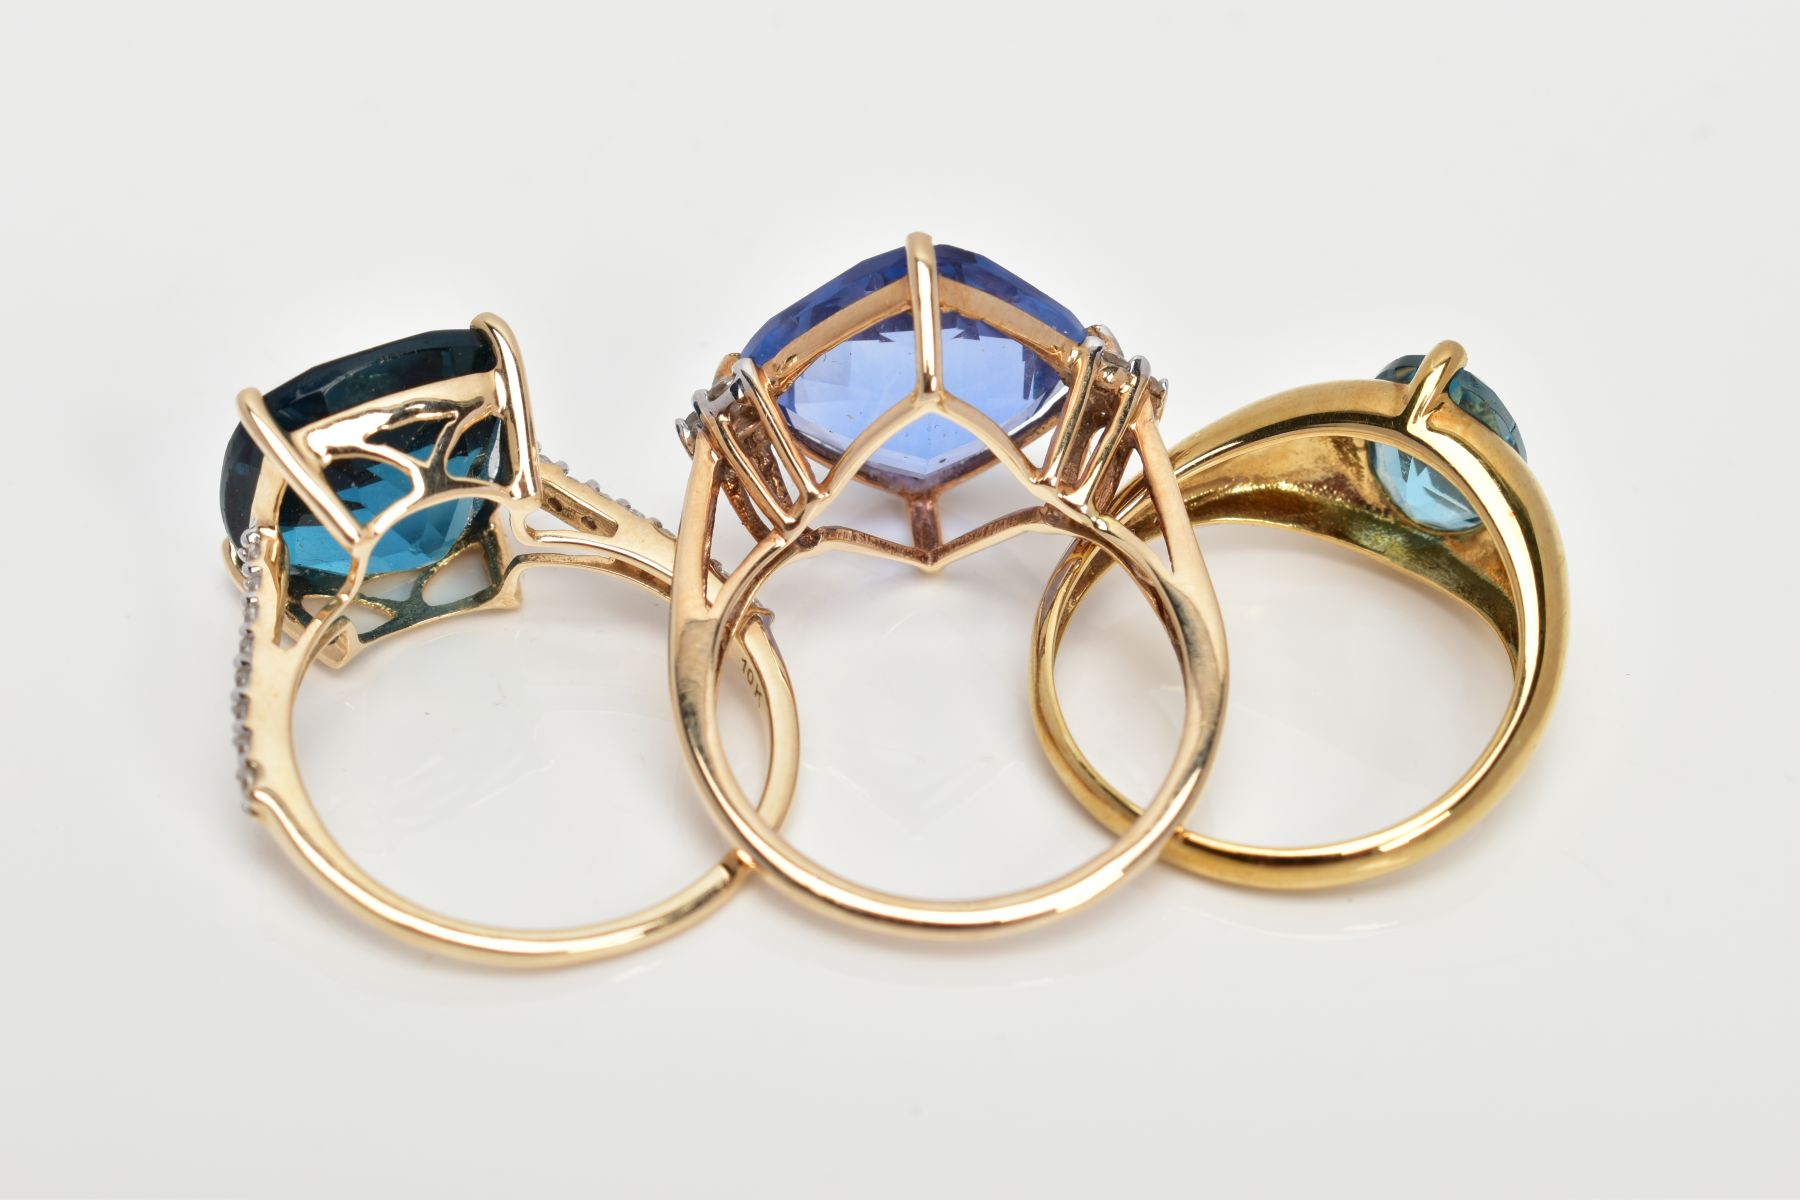 THREE 9CT GOLD GEM SET DRESS RINGS, each set with a vary cut blue stone possibly topaz/fluorite - Image 3 of 3